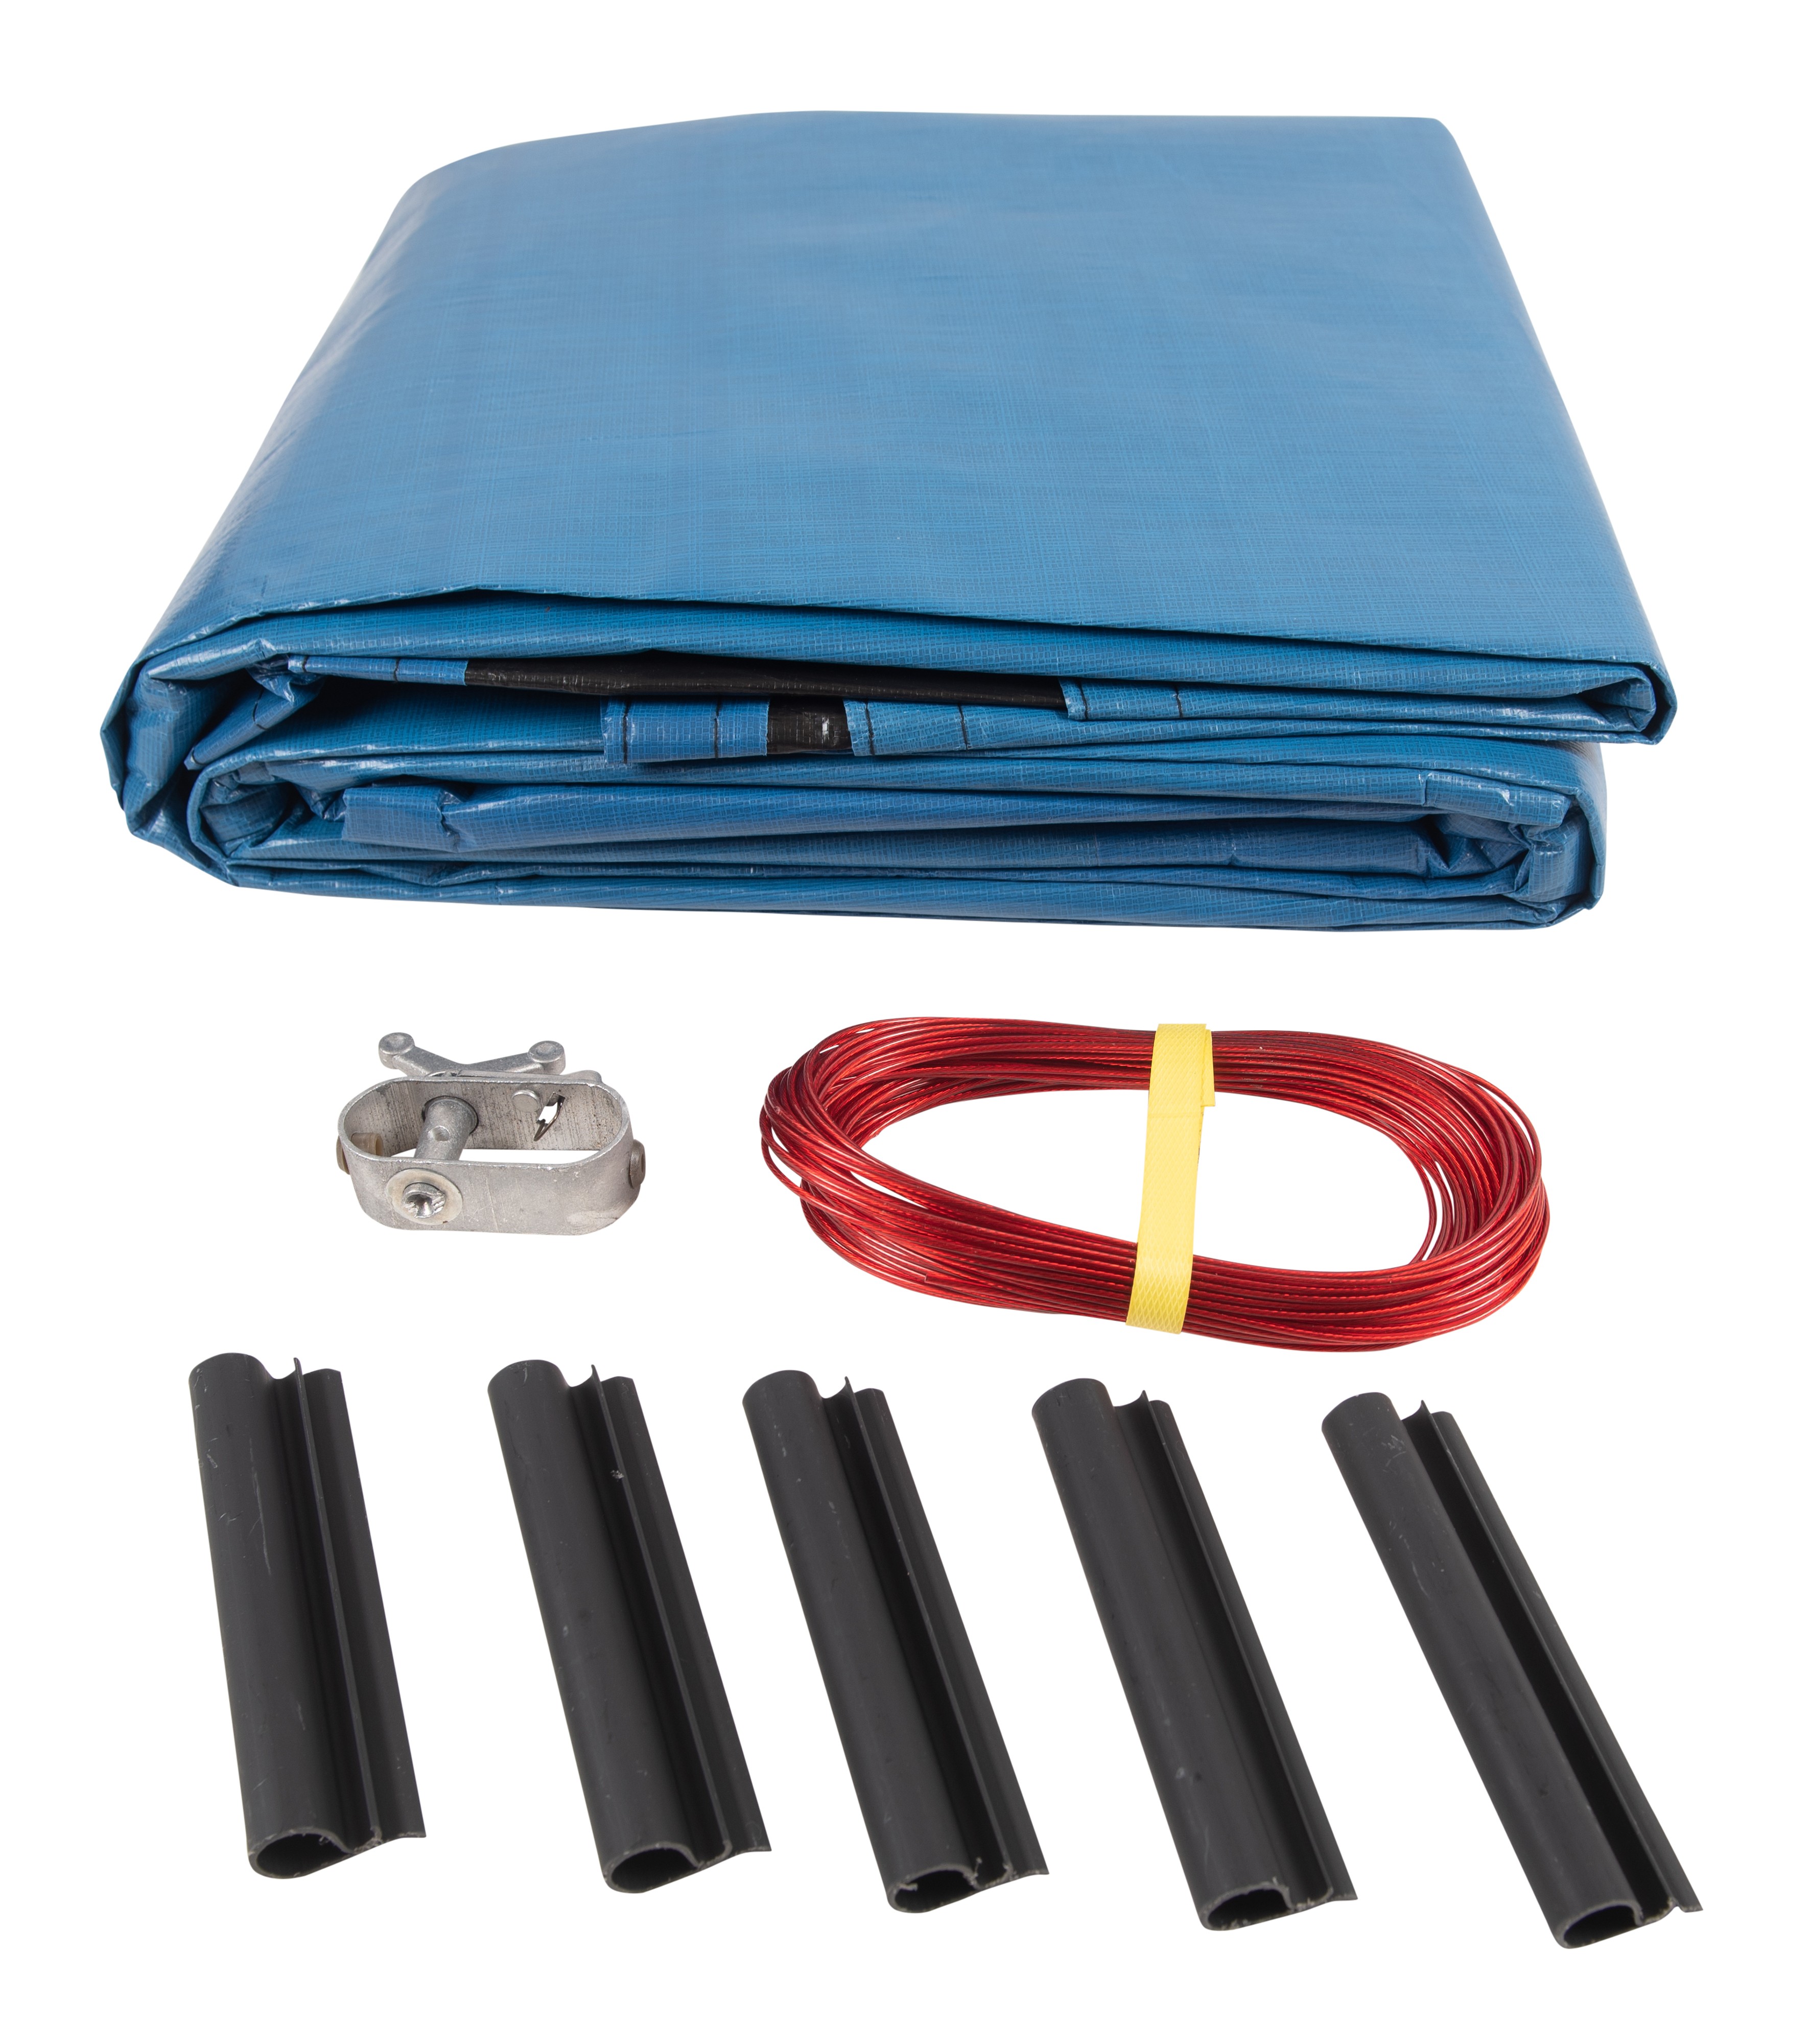 SET SunSolar Energy Technologies-  Super Duty series Above Ground Solid Pool Cover for 16x32 Foot Oval Swimming Pool - Winter Pool Cover with Sturdy Cable and Winch 15-Yr warranty. Cover Clips Included.